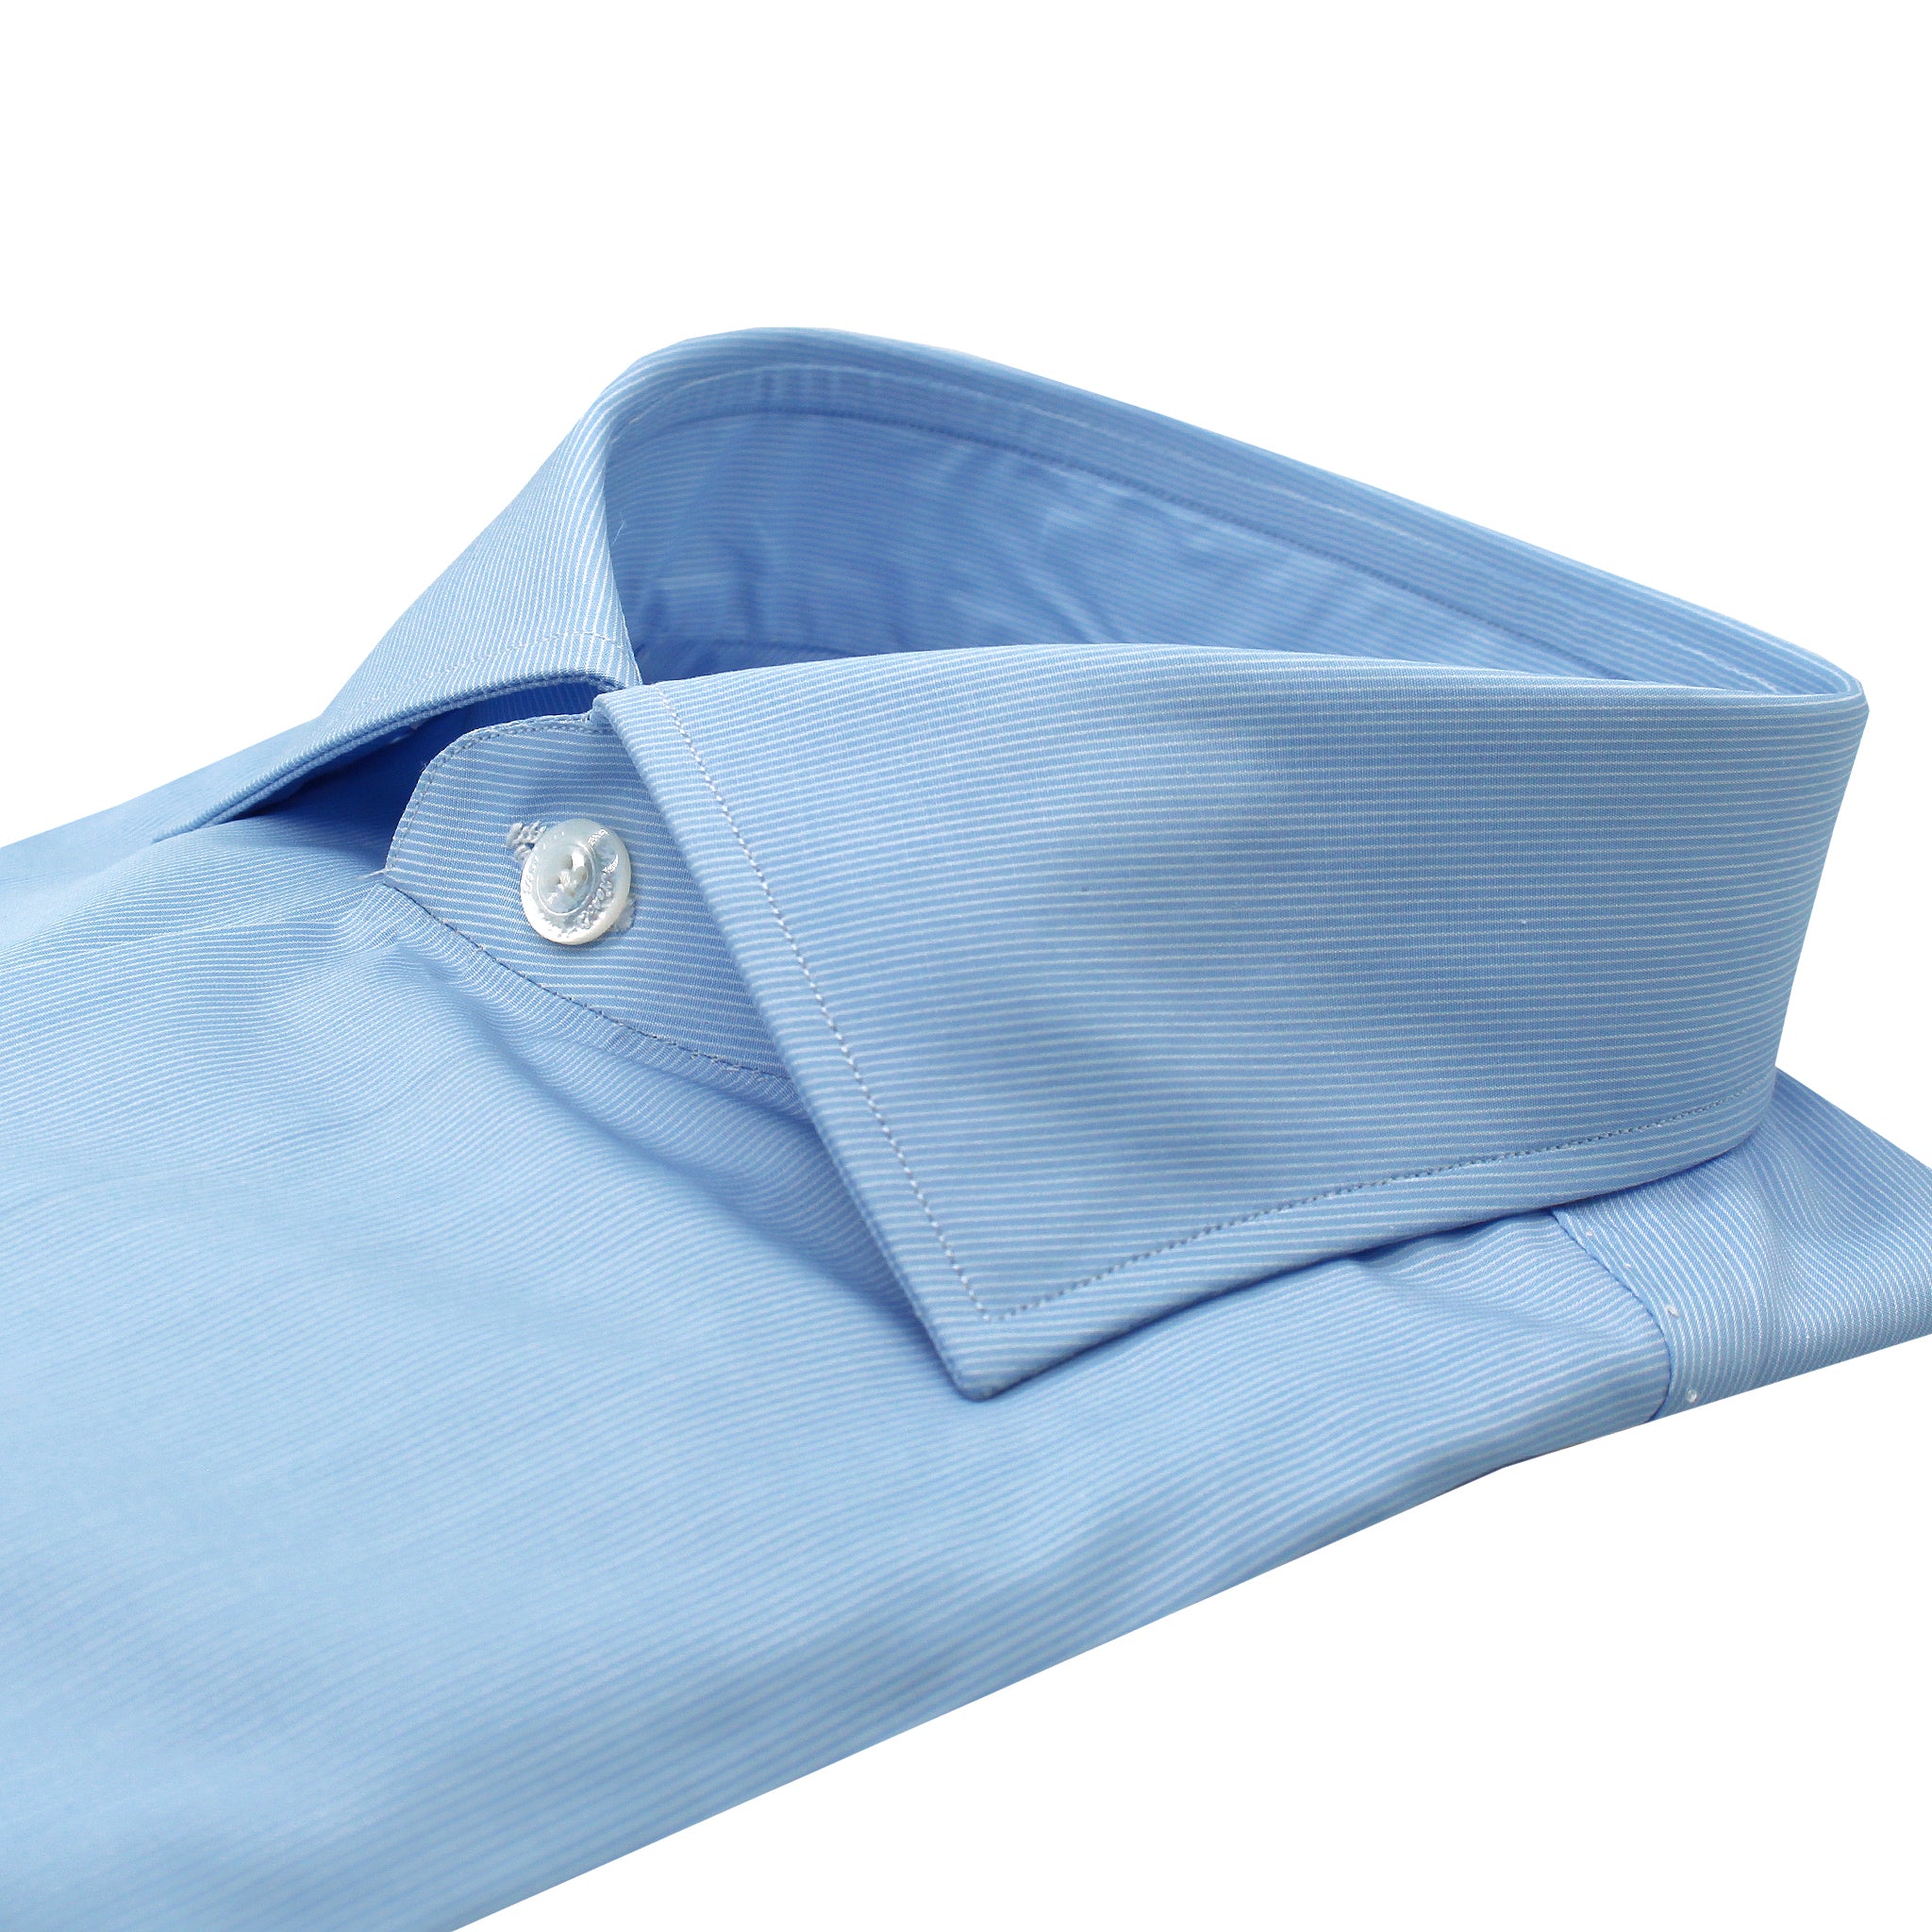 Classic Napoli 170 a Due shirt in light blue cotton micro stripes